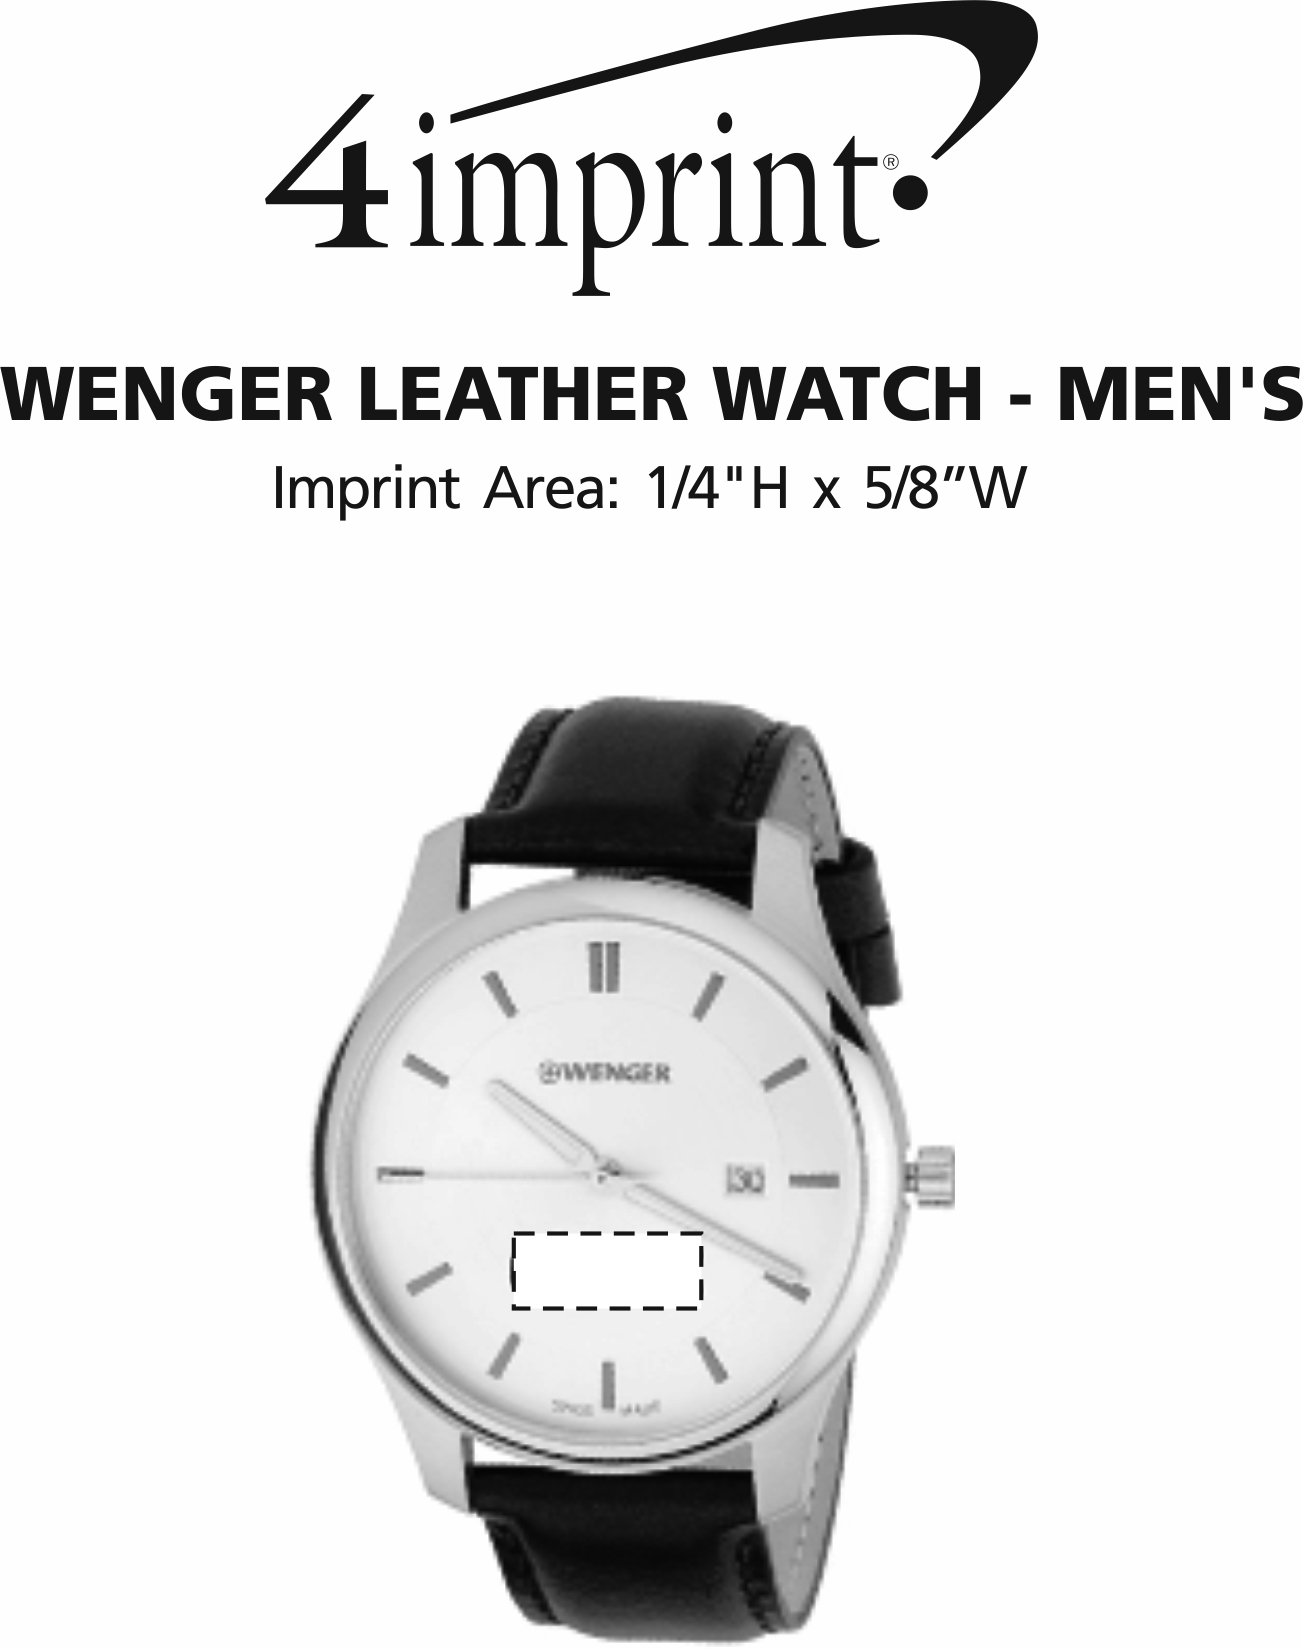 Imprint Area of Wenger Leather Watch - 1-5/8"